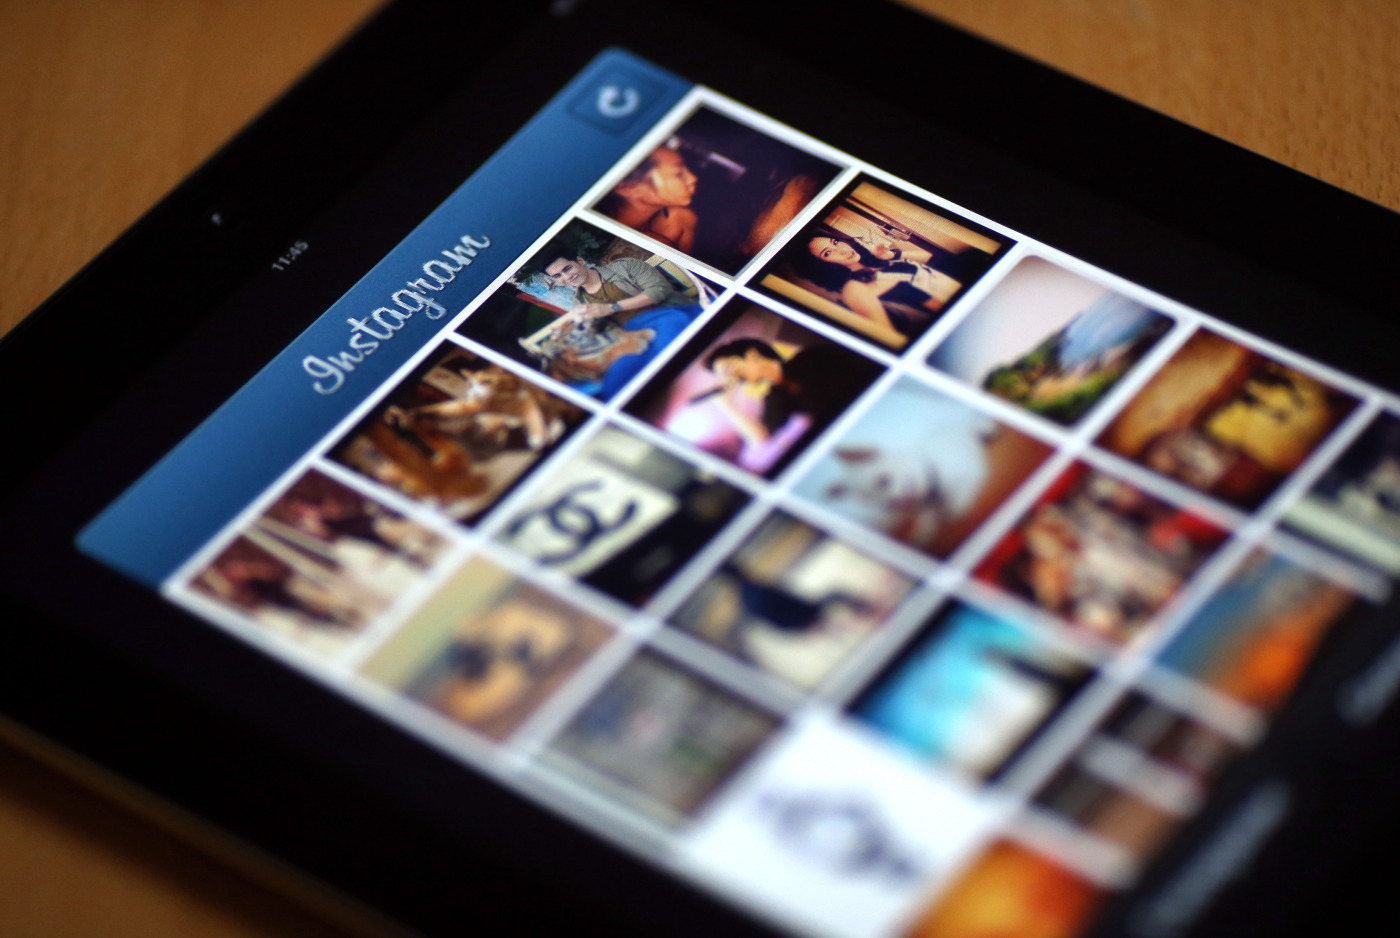 Pictures appear on the smartphone sharing application Instagram.